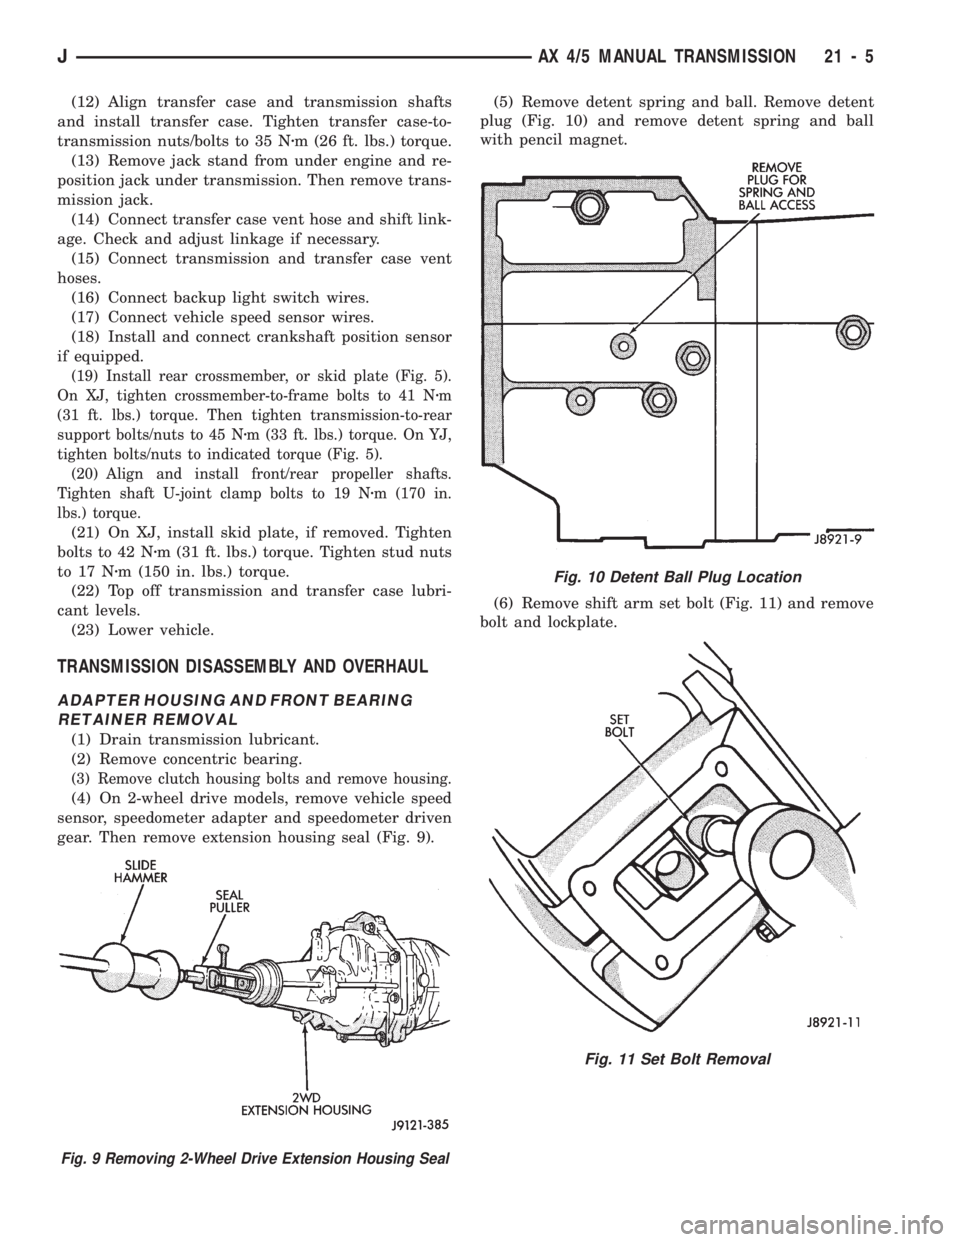 JEEP WRANGLER 1994  Owners Manual Fig. 11 Set Bolt Removal
Fig. 9 Removing 2-Wheel Drive Extension Housing Seal
JAX 4/5 MANUAL TRANSMISSION 21 - 5 